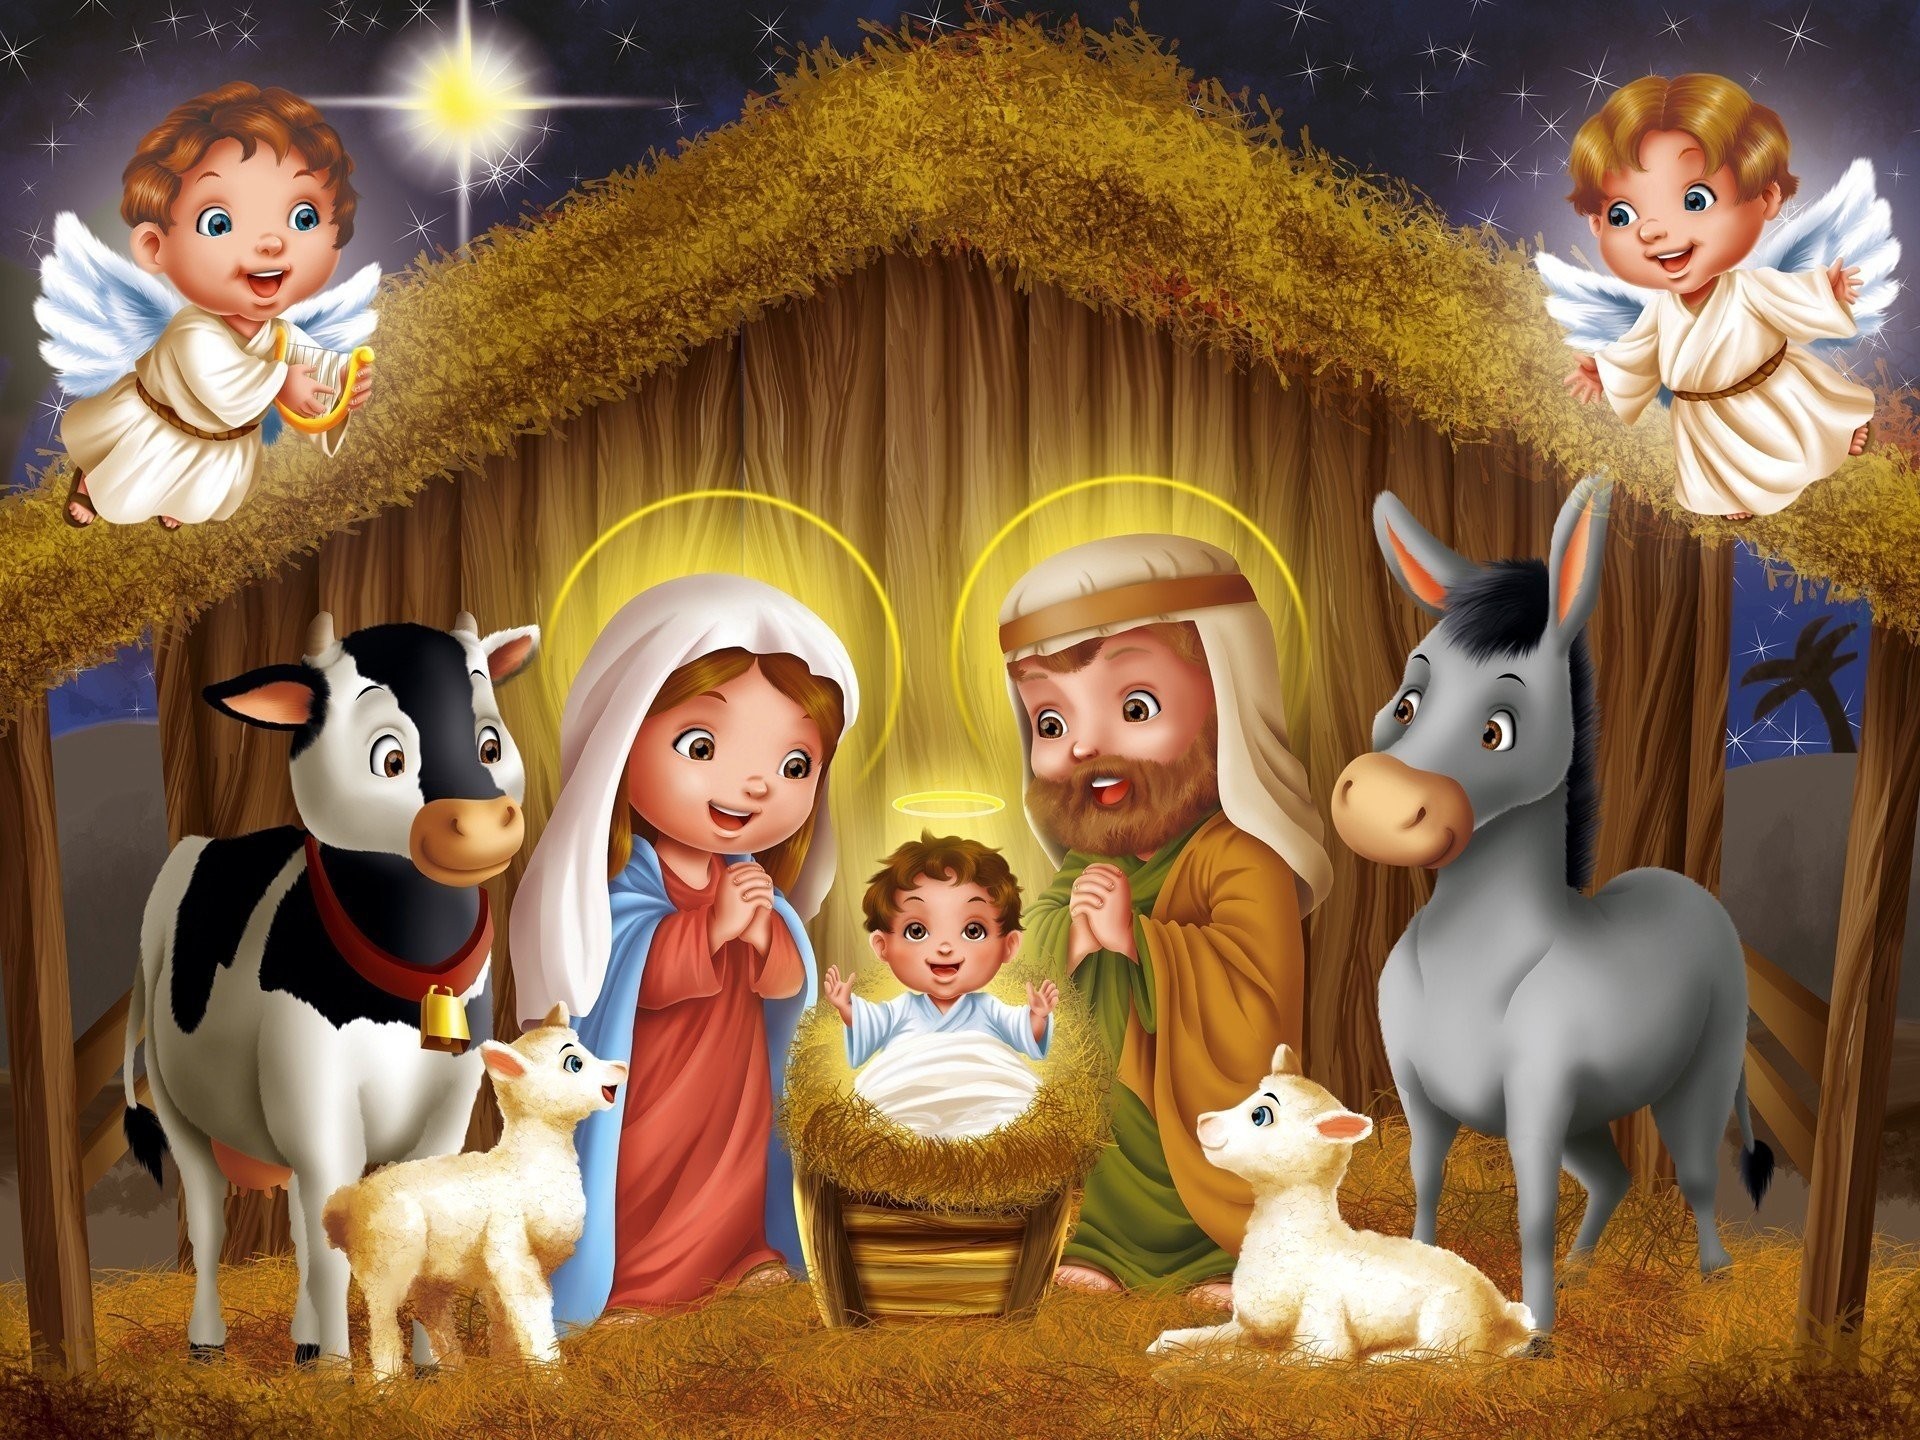 Cradle art cow sheep star merry christmas price ass night child angels new year